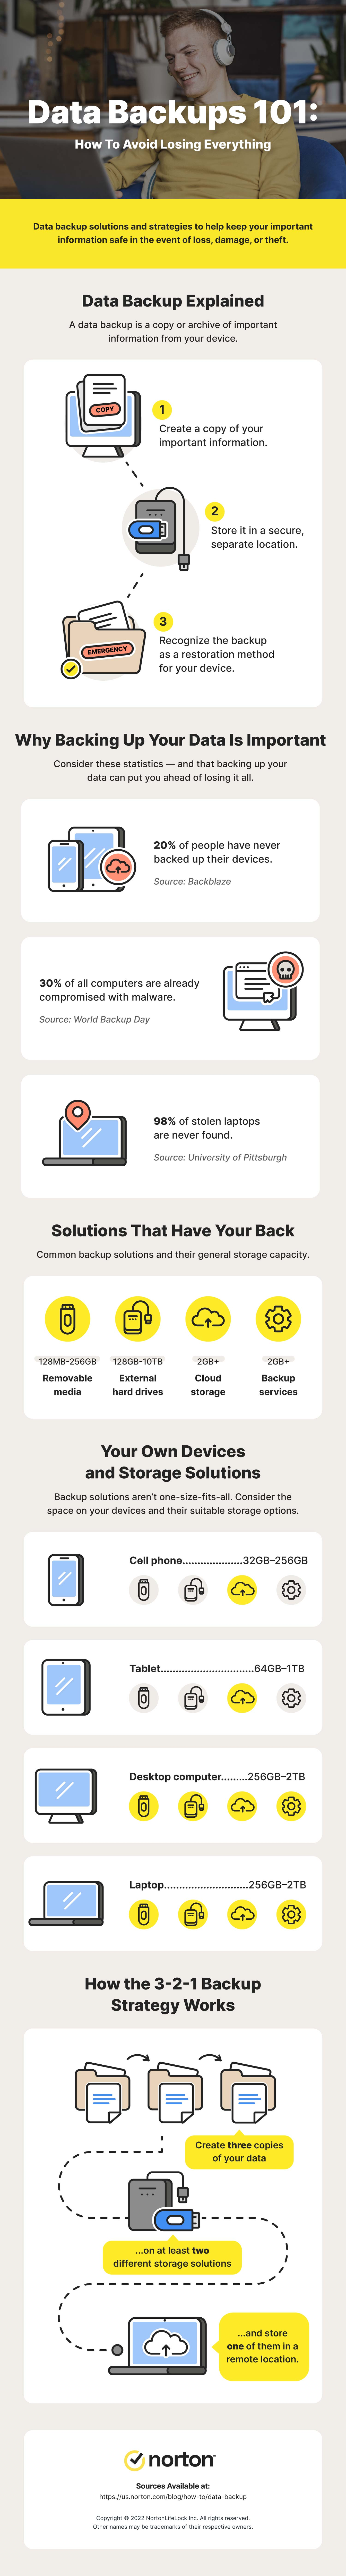 An infographic covers the ins and outs of data backups, ranging from storage solutions to data backup statistics.